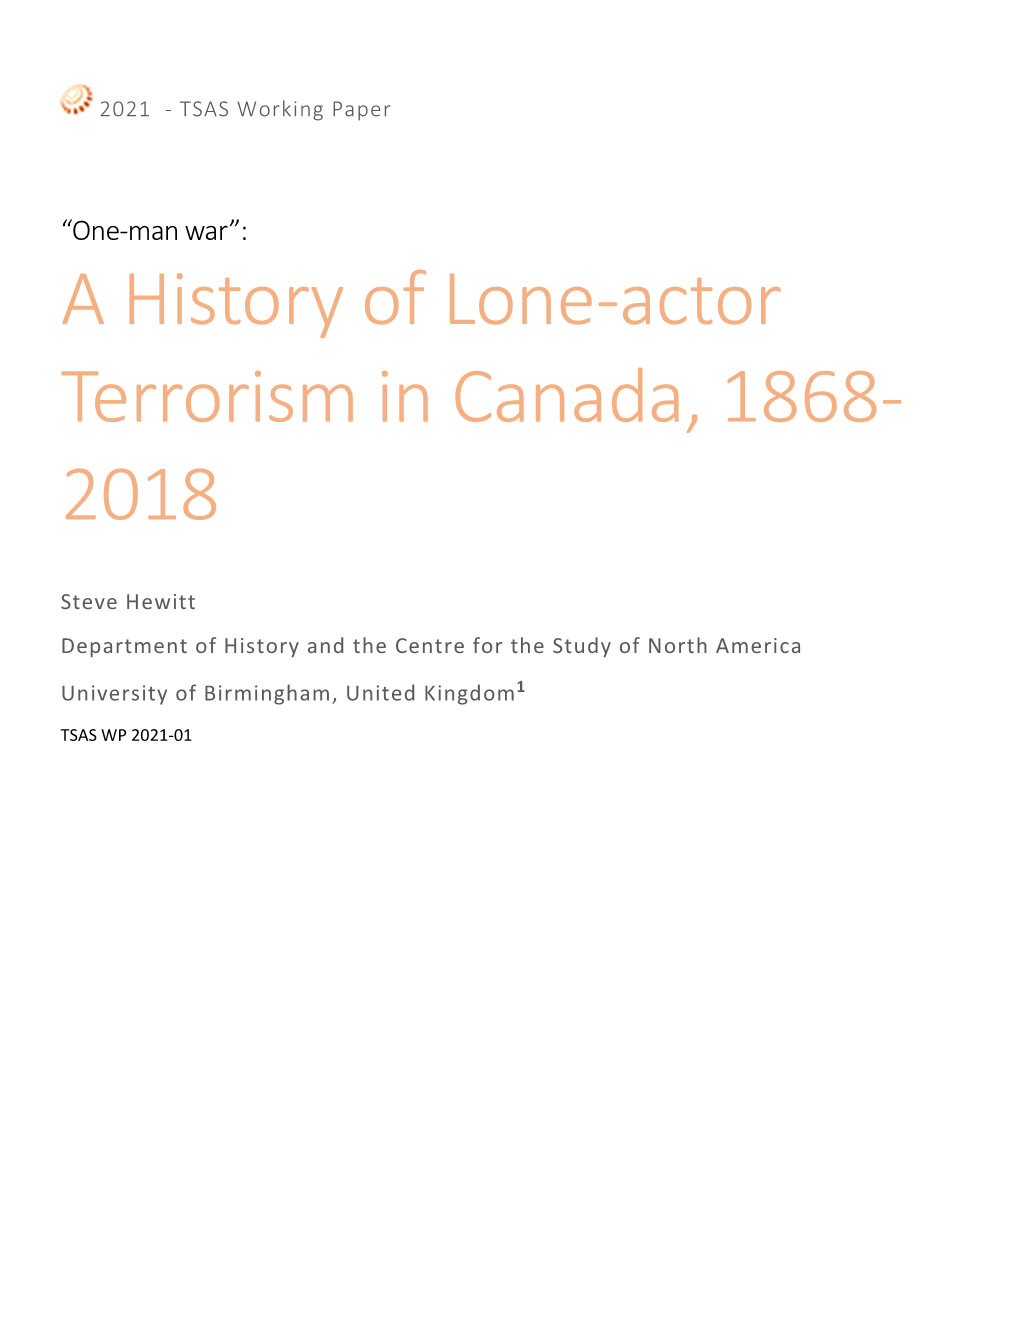 A History of Lone-Actor Terrorism in Canada, 1868- 2018